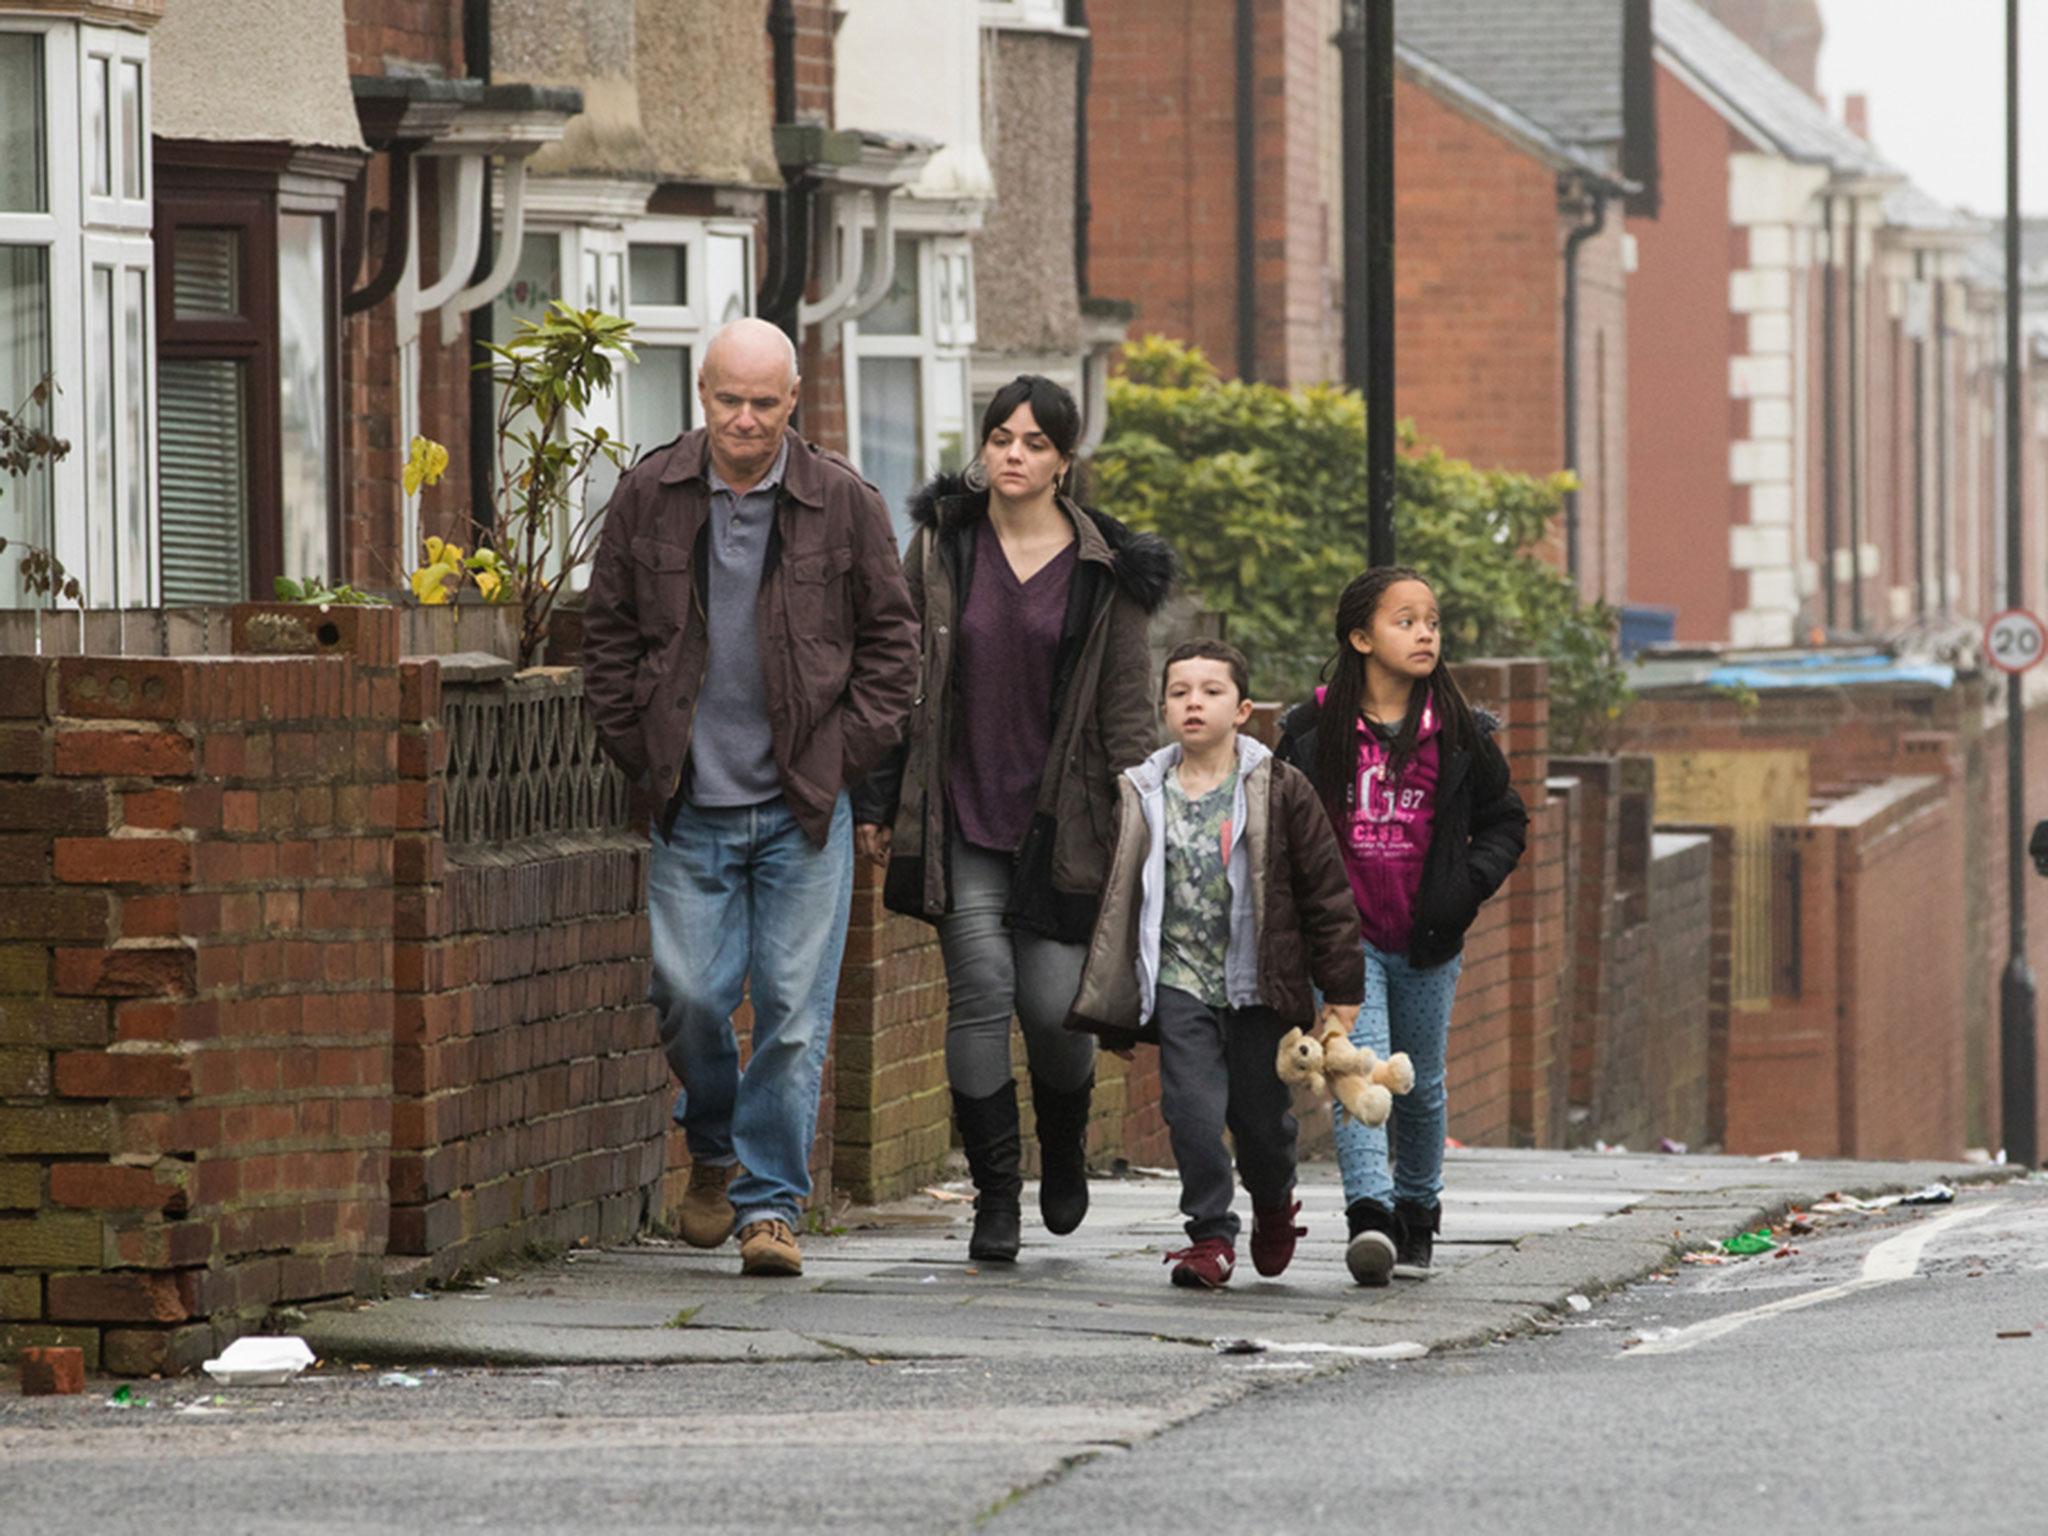 Ken Loach's 'I, Daniel Blake' tells the story of a joiner who seeks state help following an illness